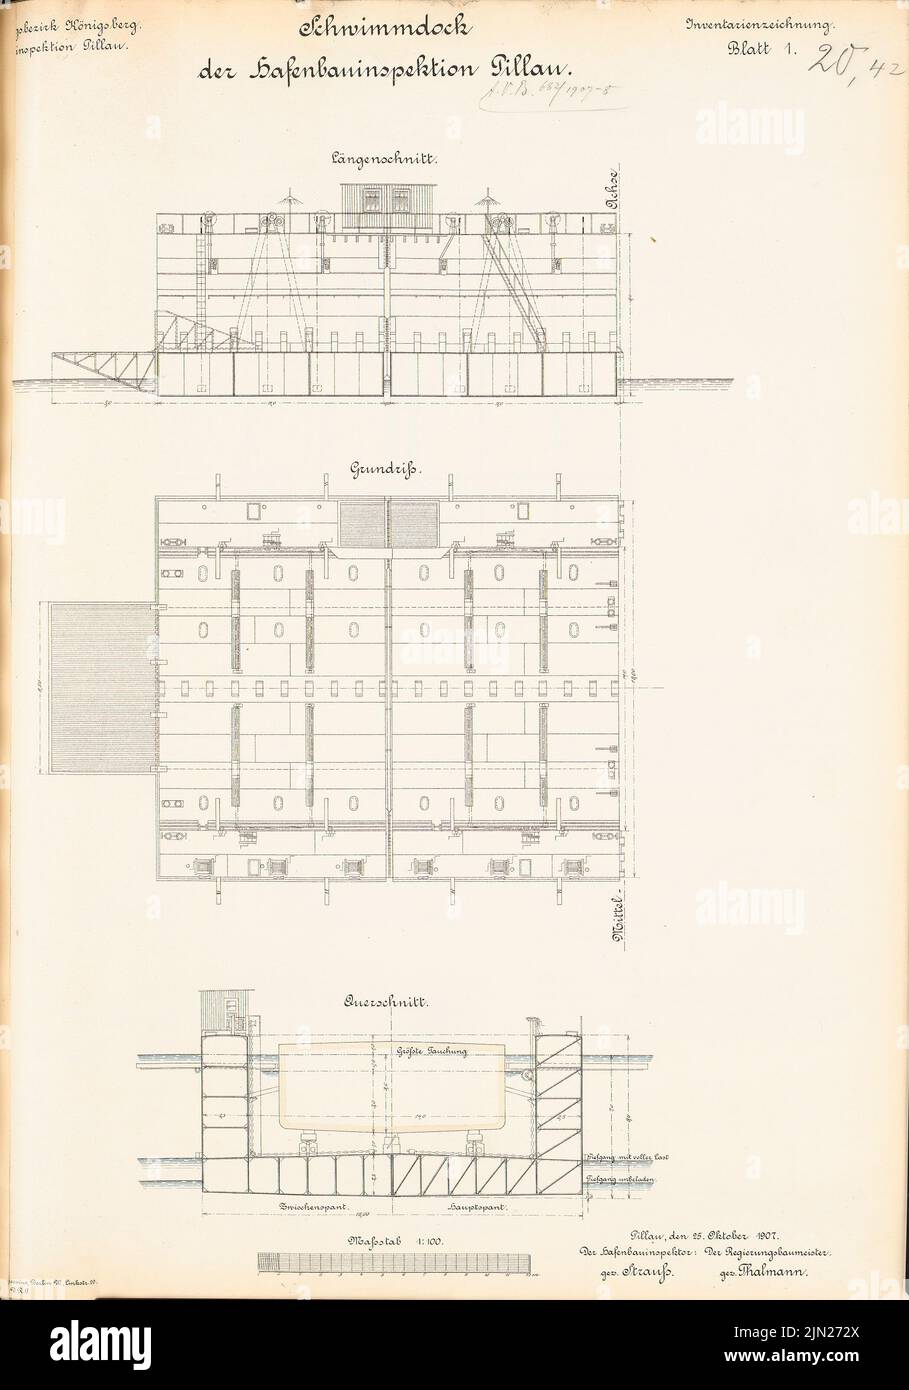 N.N., swimming dock of the port construction inspection, Pillau: floor plan, cuts 1: 100. Lithograph colored on paper, 62.3 x 43.6 cm (including scan edges) Stock Photo